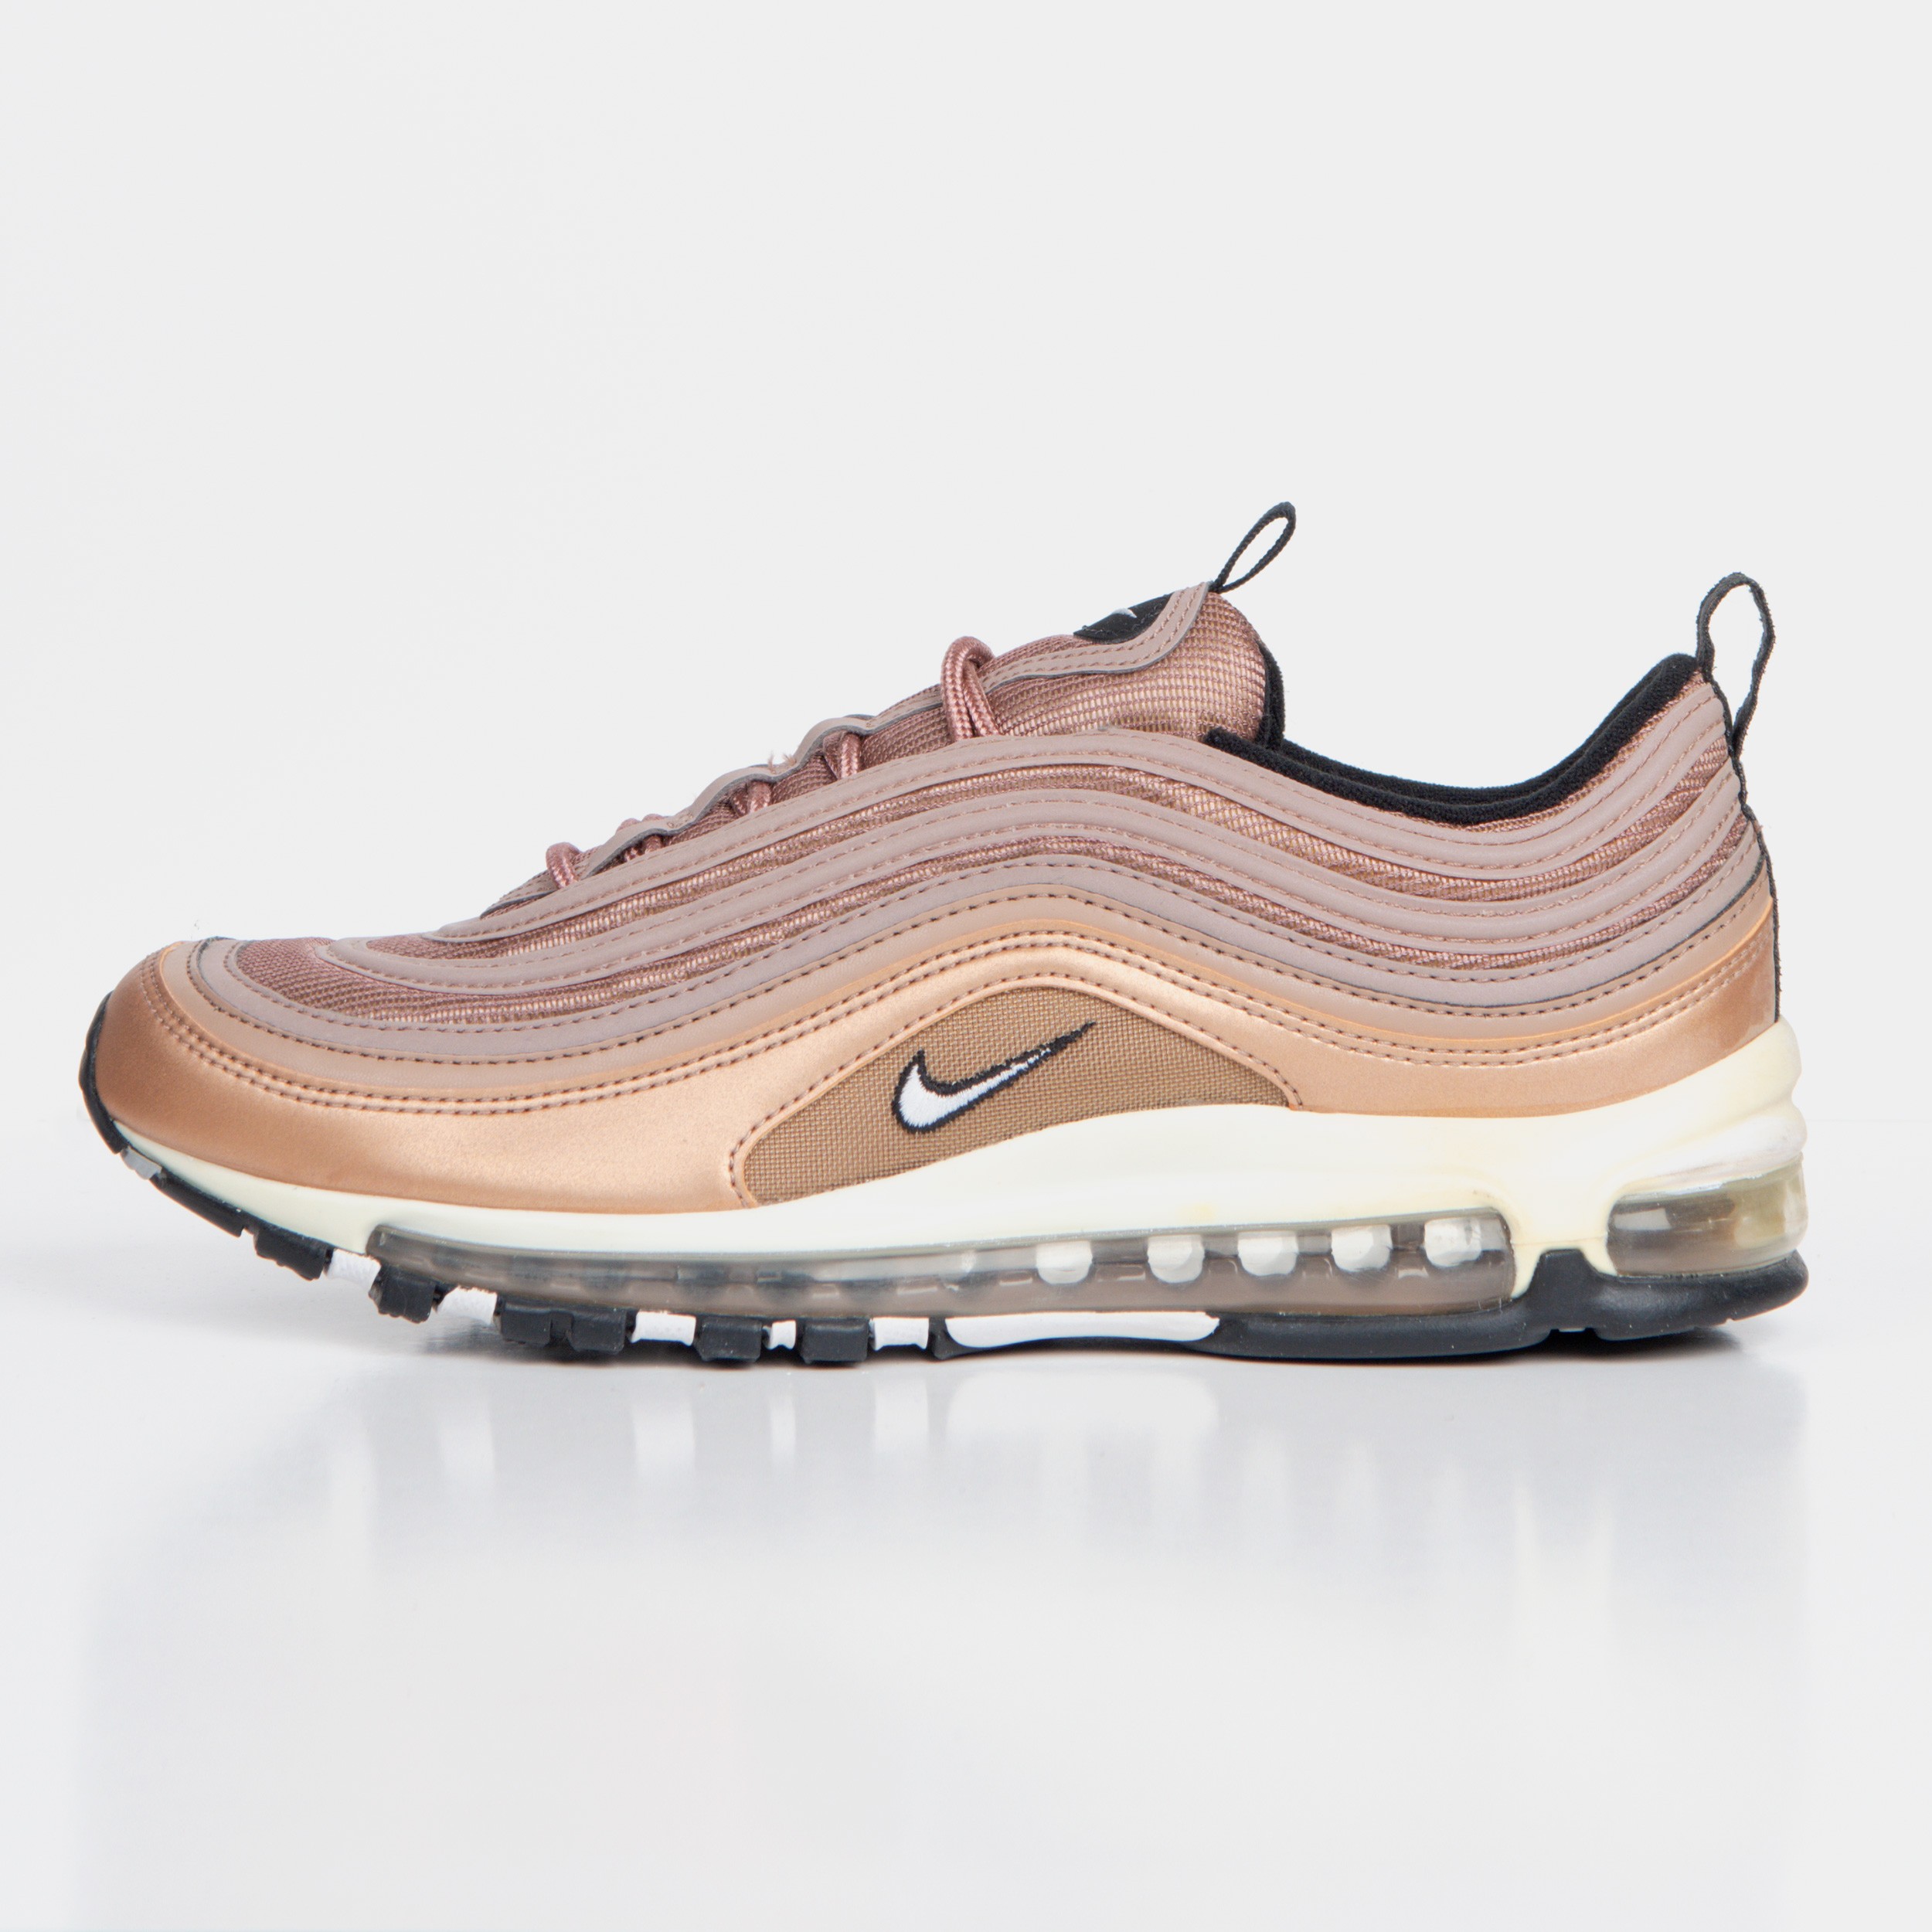 Technologie Strippen Antagonisme RE-POCKETS NIKE TRAINERS Nike Air Max 97 Metallic Rose Gold